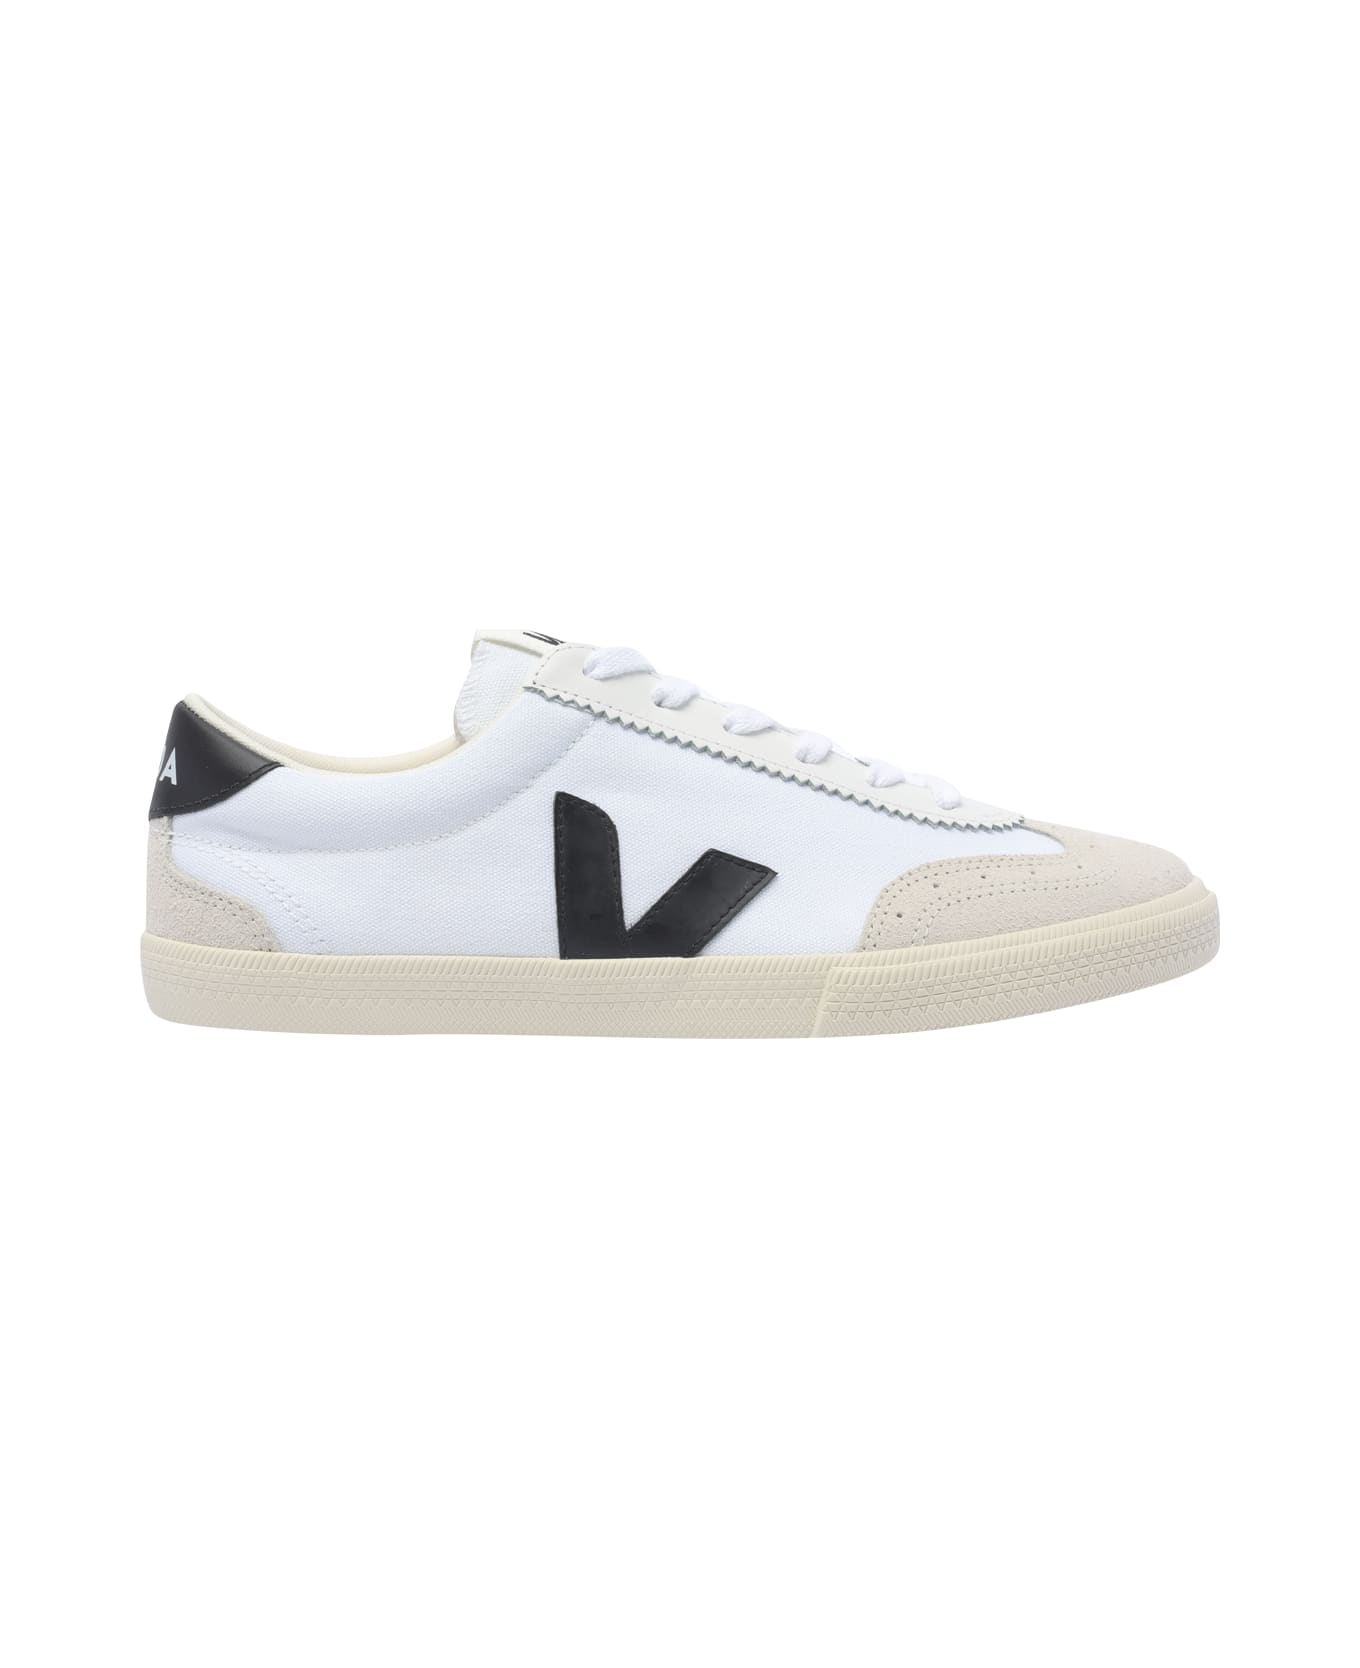 Veja Volley Sneakers - White